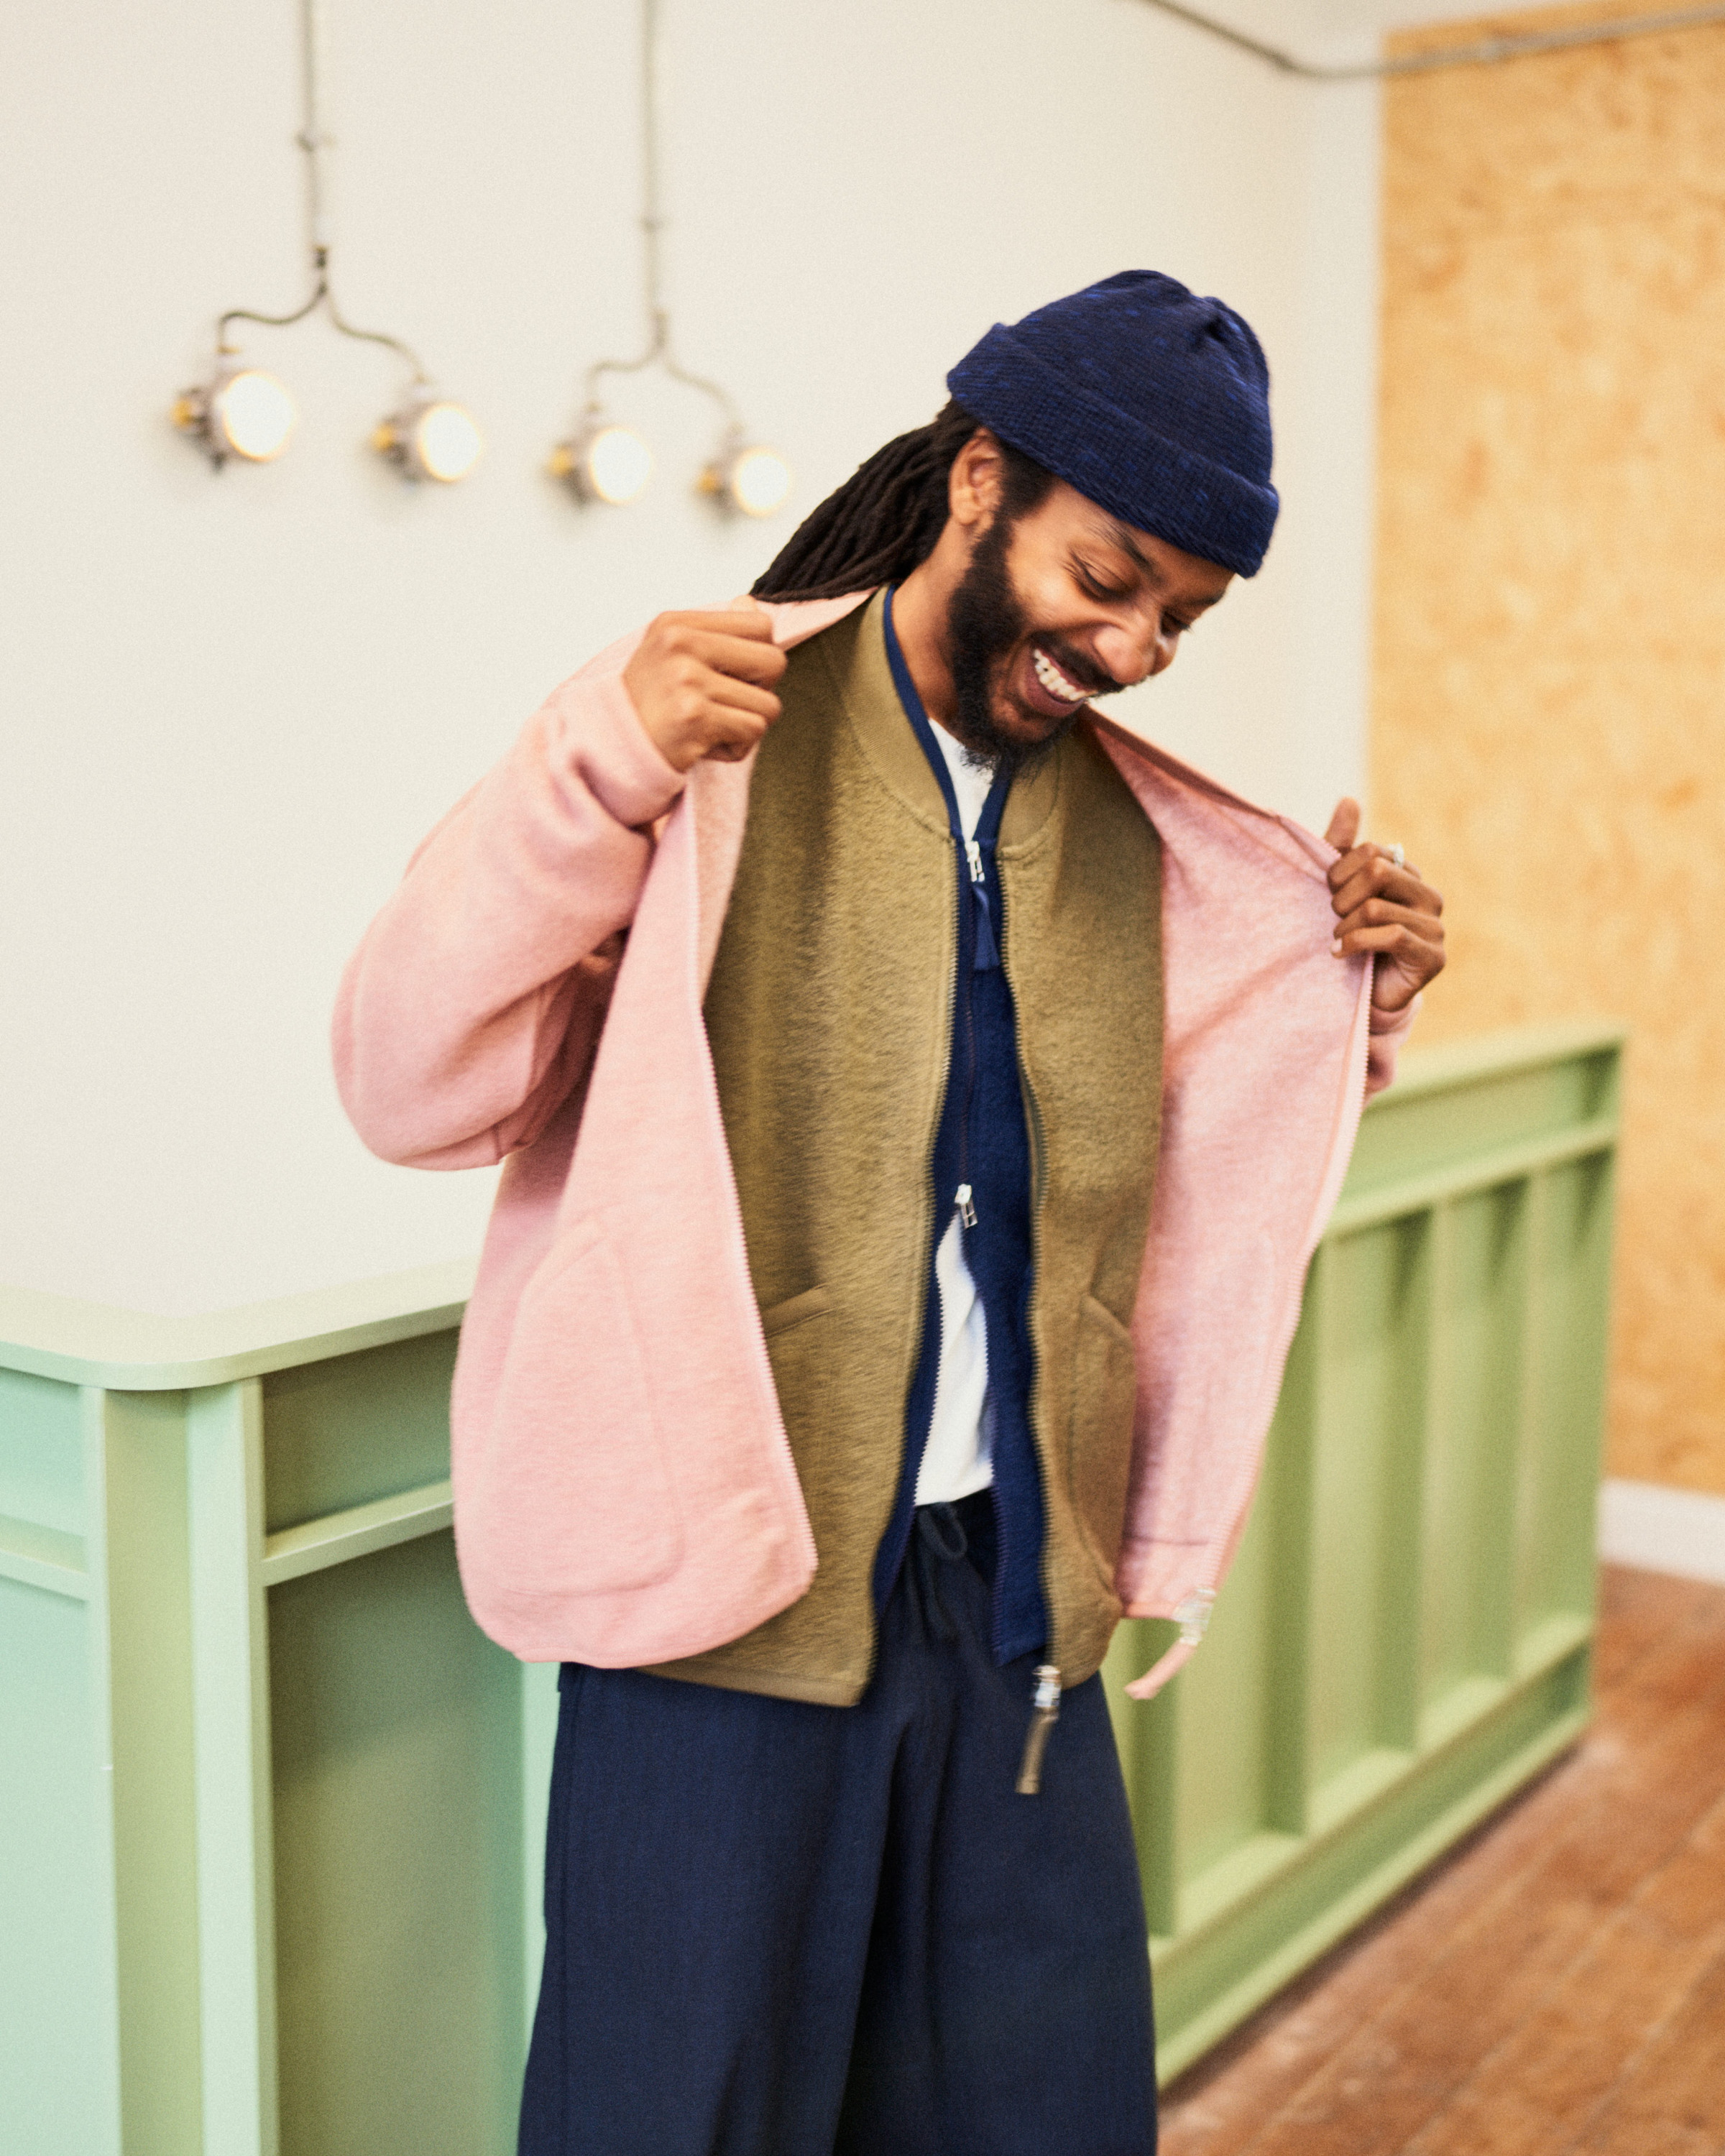 Meshach from our Derby Road store layering up our Zip Bomber Jacket in Wool Fleece